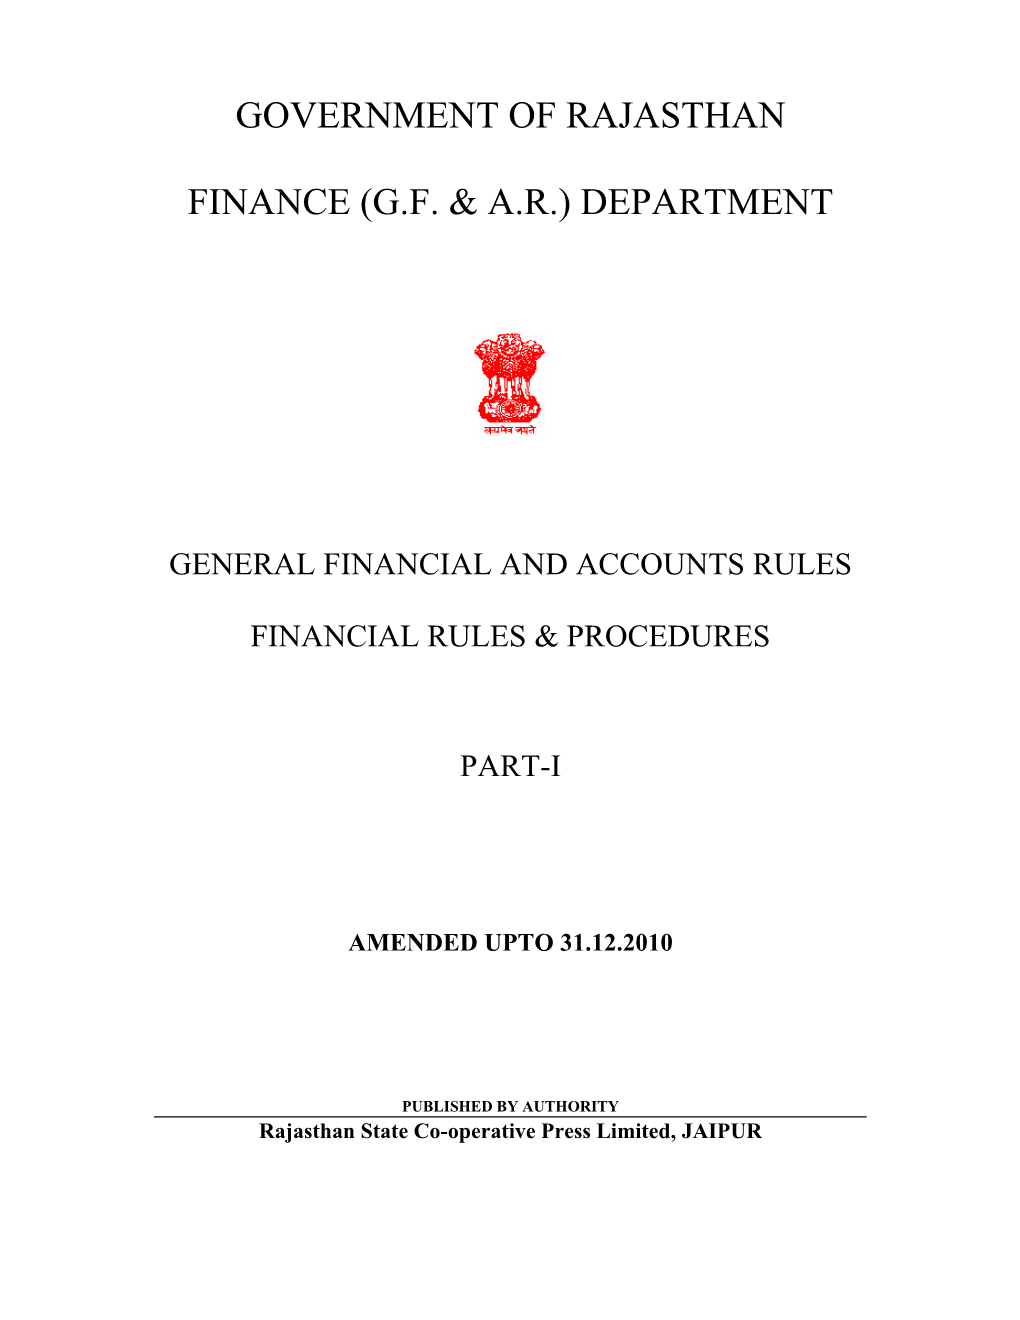 Government of Rajasthan Finance